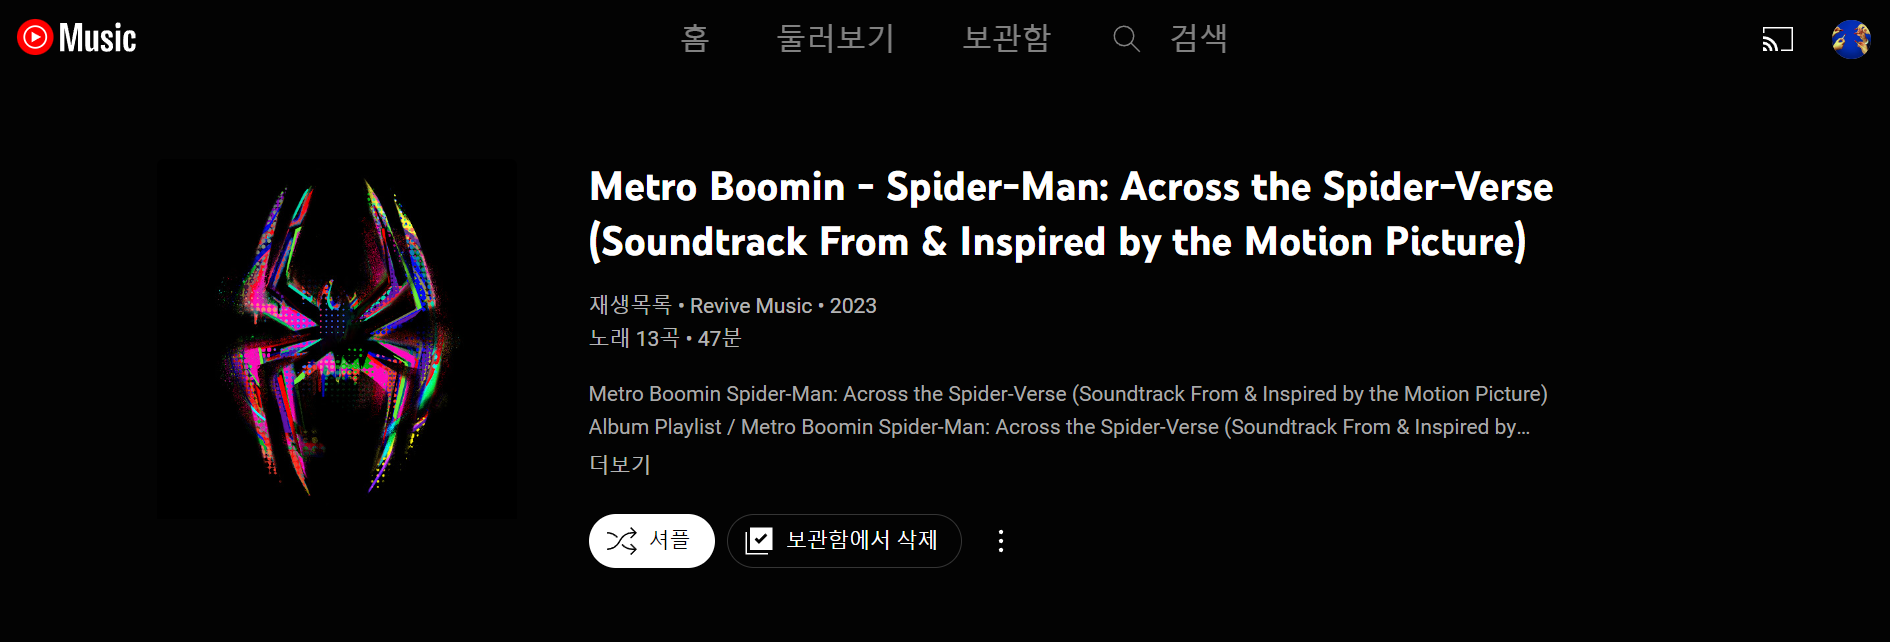 Metro Boomin - Spider-Man: Across the Spider-Verse (Soundtrack From & Inspired by the Motion Picture)